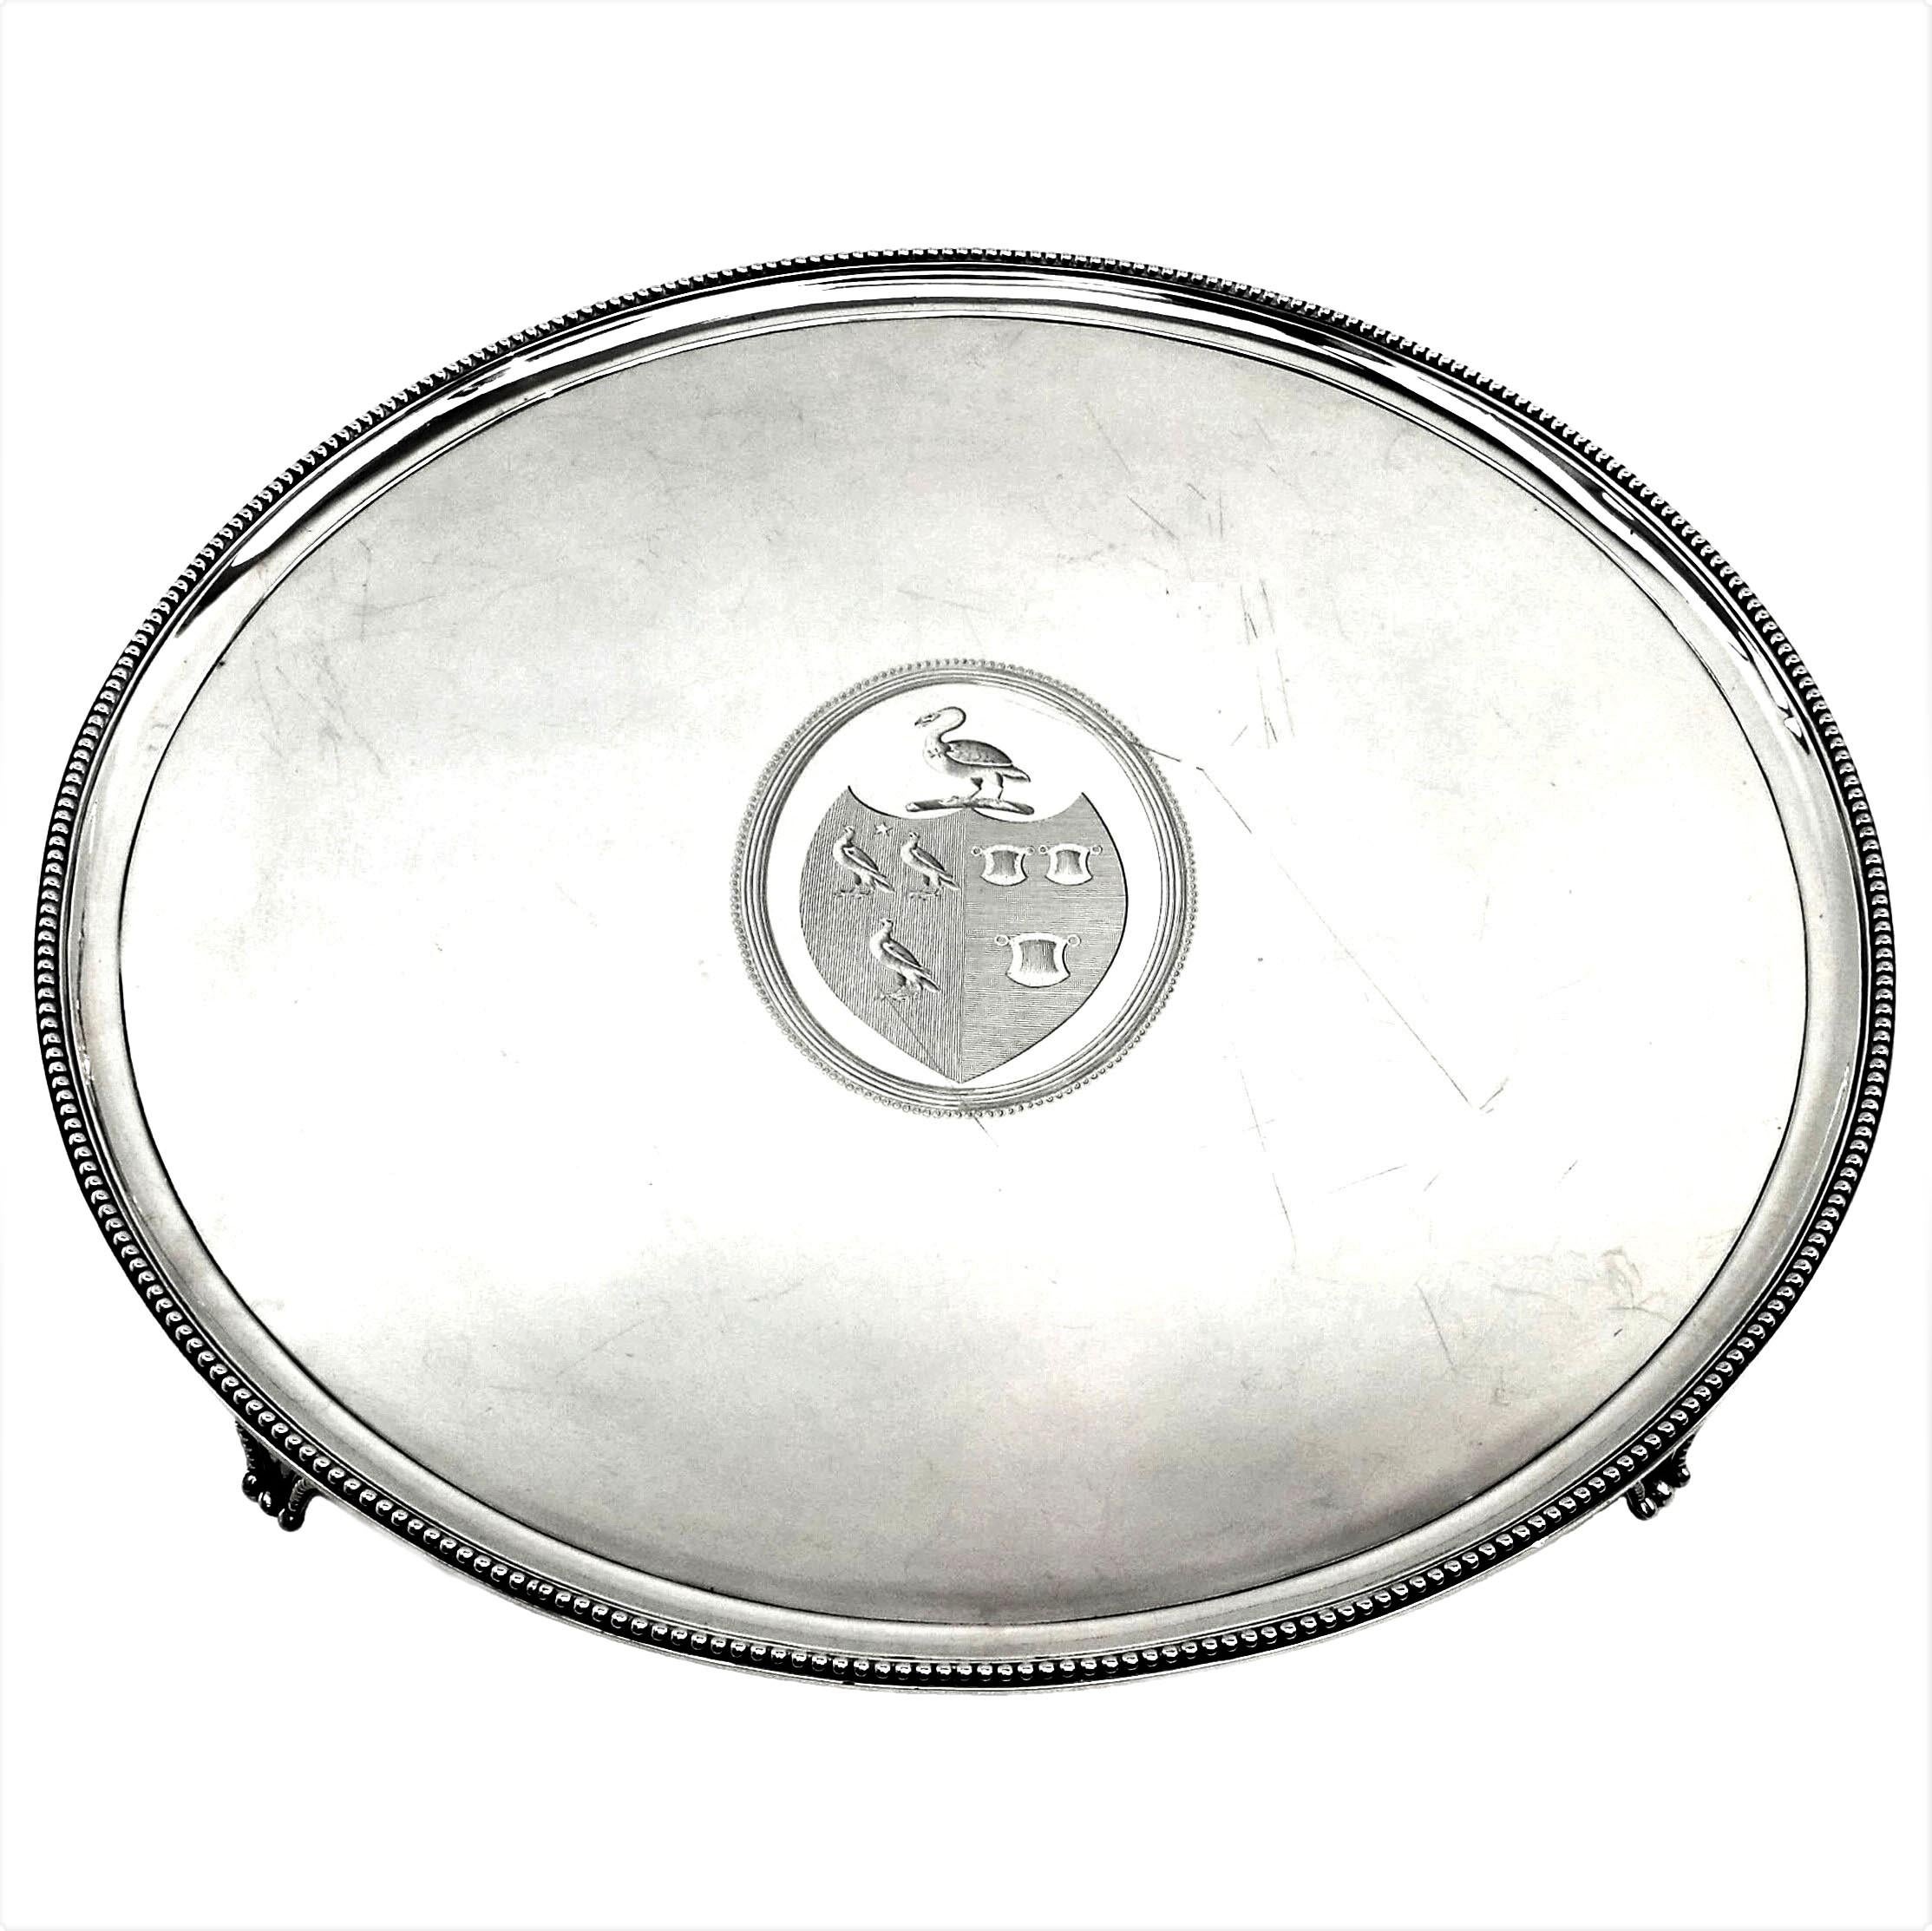 A good size Antique Georgian Solid Silver Salver / Tray standing on four Feet. The Round George III Salver is embellished with a classic beaded border around the rim and on the feet. The tray has a substantial crest engraved in the centre. 
 
 Made